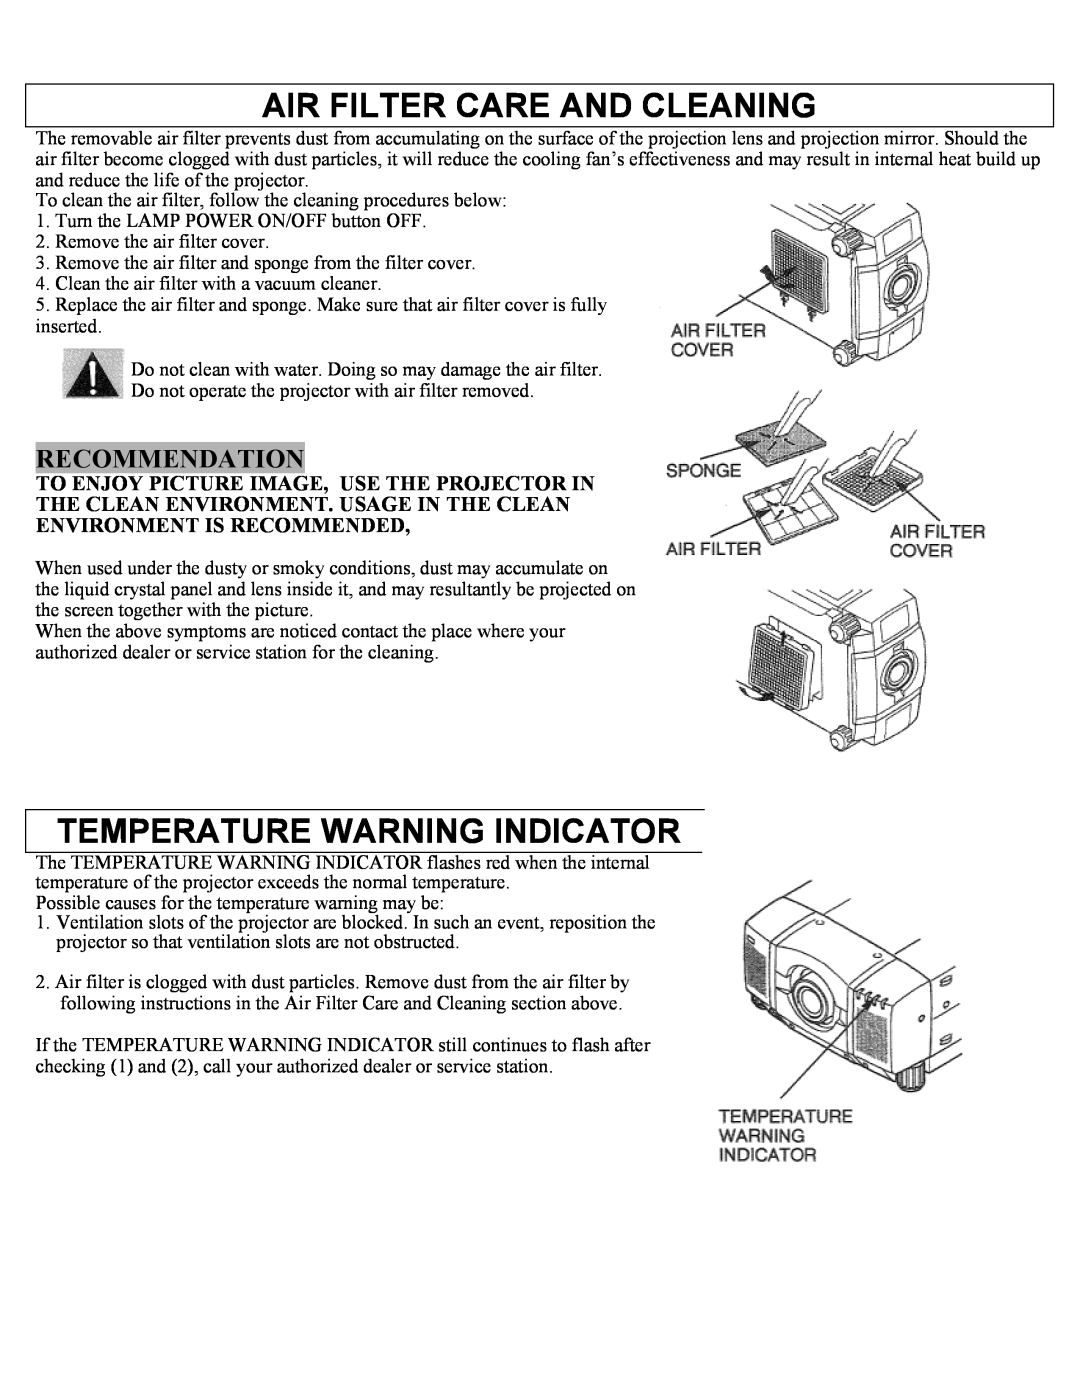 Eiki LC-X1UA, LC-X1UL instruction manual Air Filter Care And Cleaning, Temperature Warning Indicator, Recommendation 